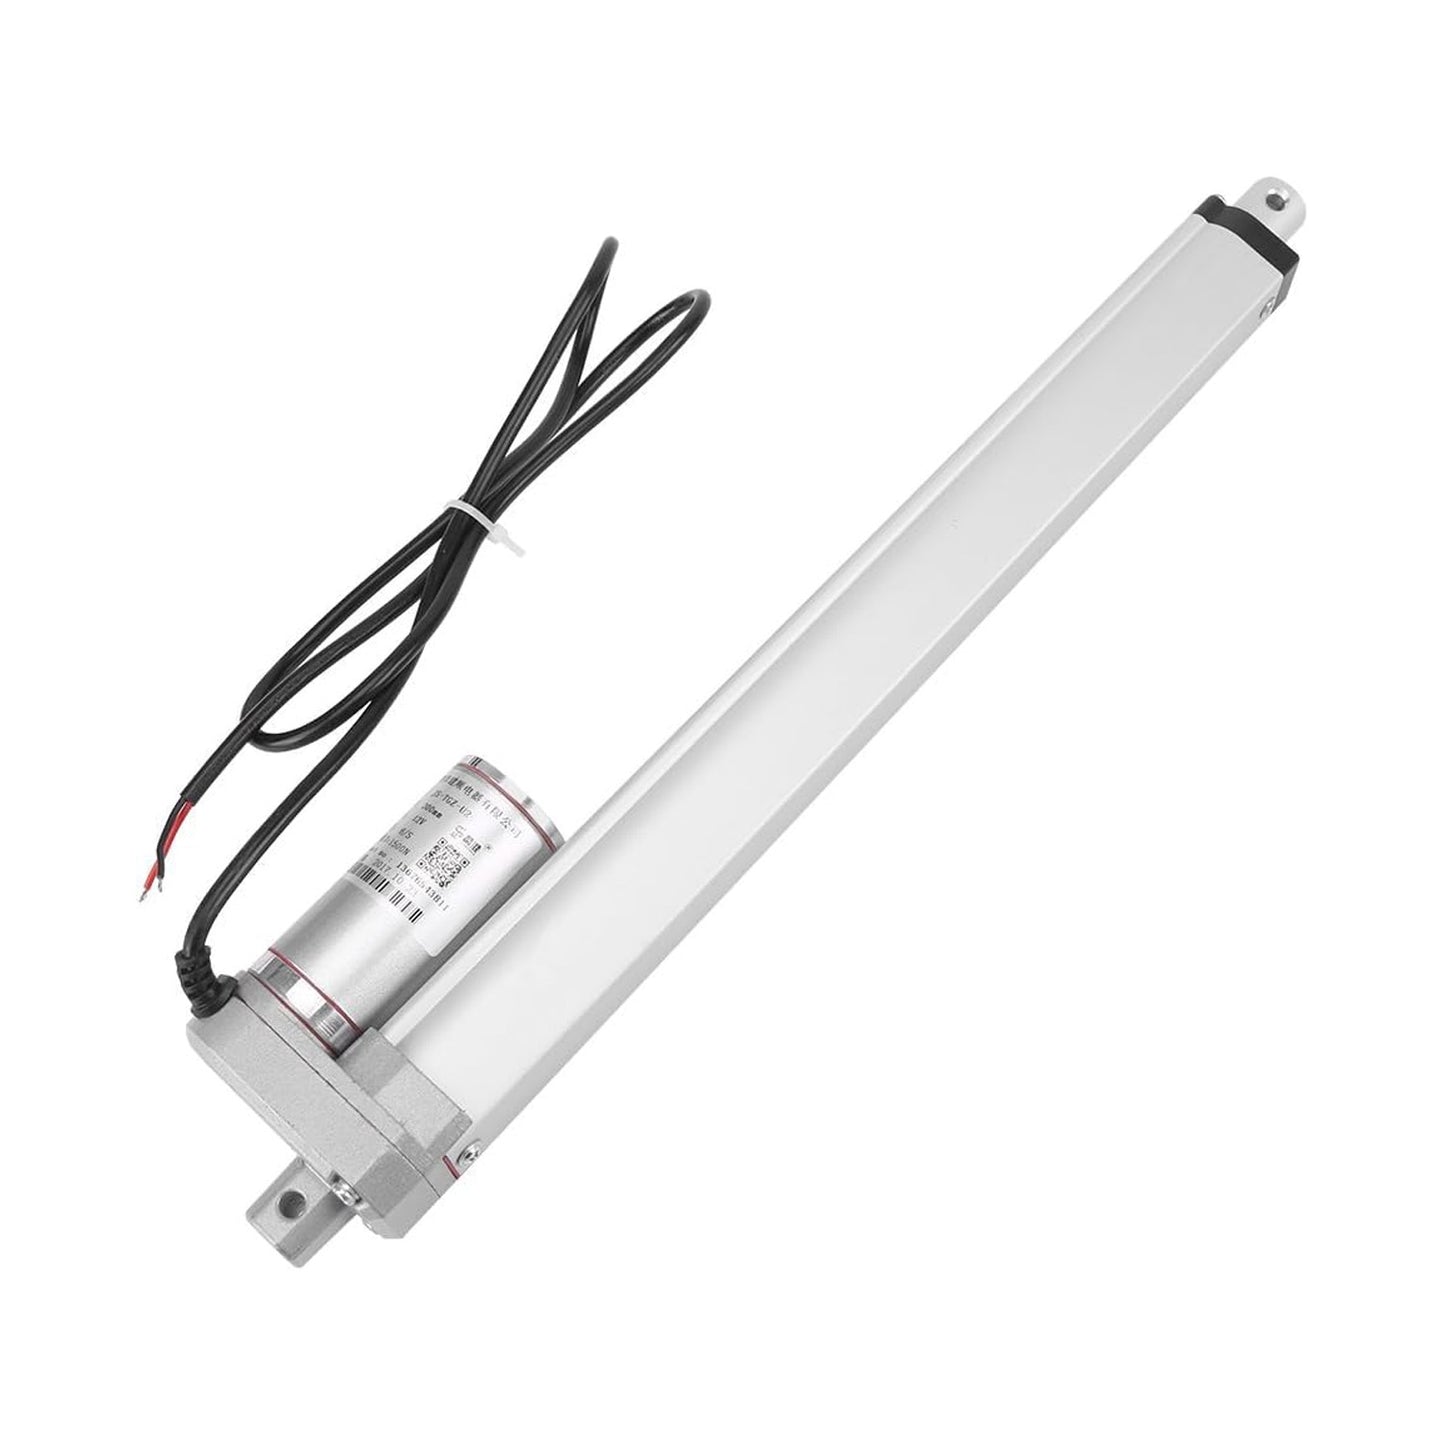 12V 300MM Linear Actuator Stroke Length Linear Actuator 50mm/S 180N - RS5024